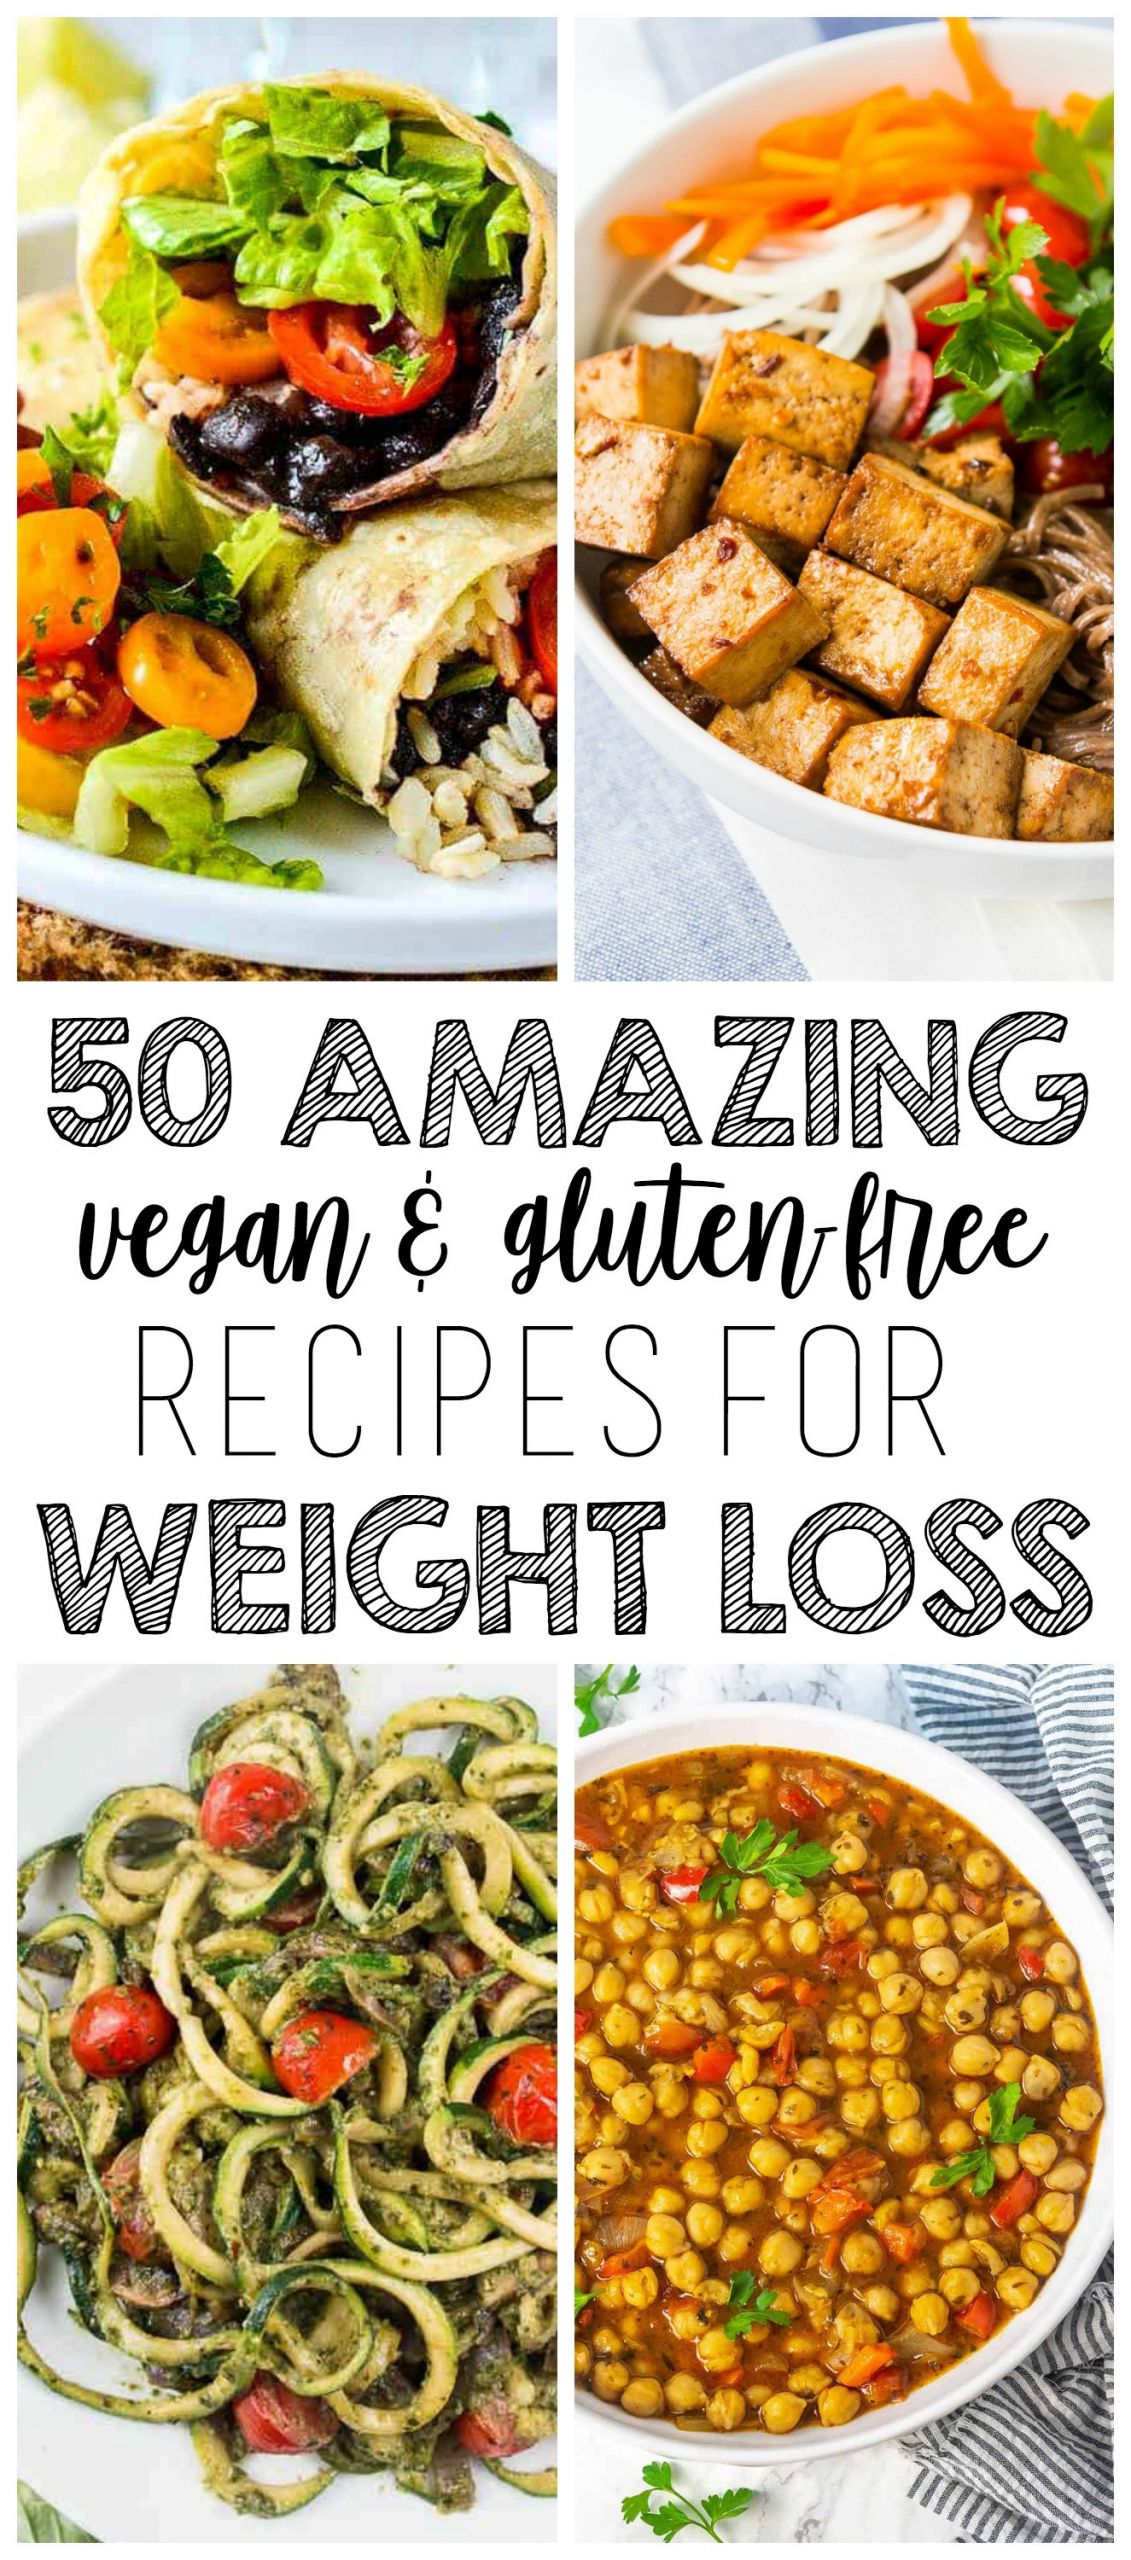 Weight Loss Vegetarian Recipes
 50 AMAZING Vegan Meals for Weight Loss Gluten Free & Low